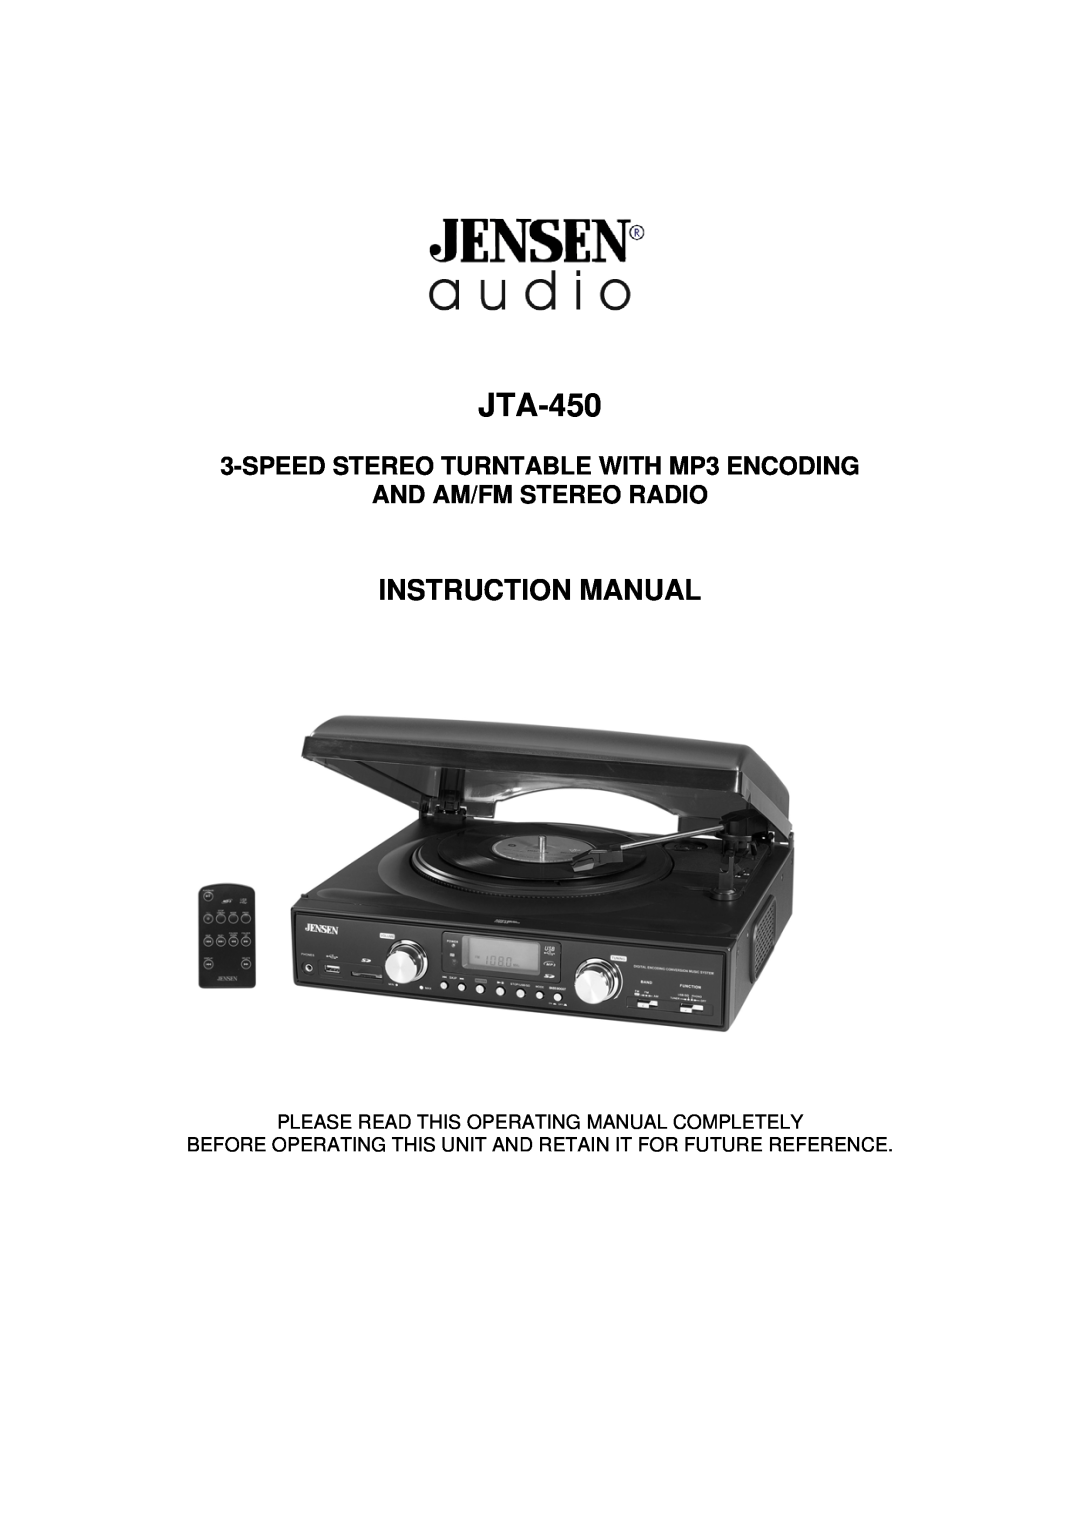 Jensen JTA-450 instruction manual SPEEDSTEREO TURNTABLE WITH MP3 ENCODING, And Am/Fm Stereo Radio 